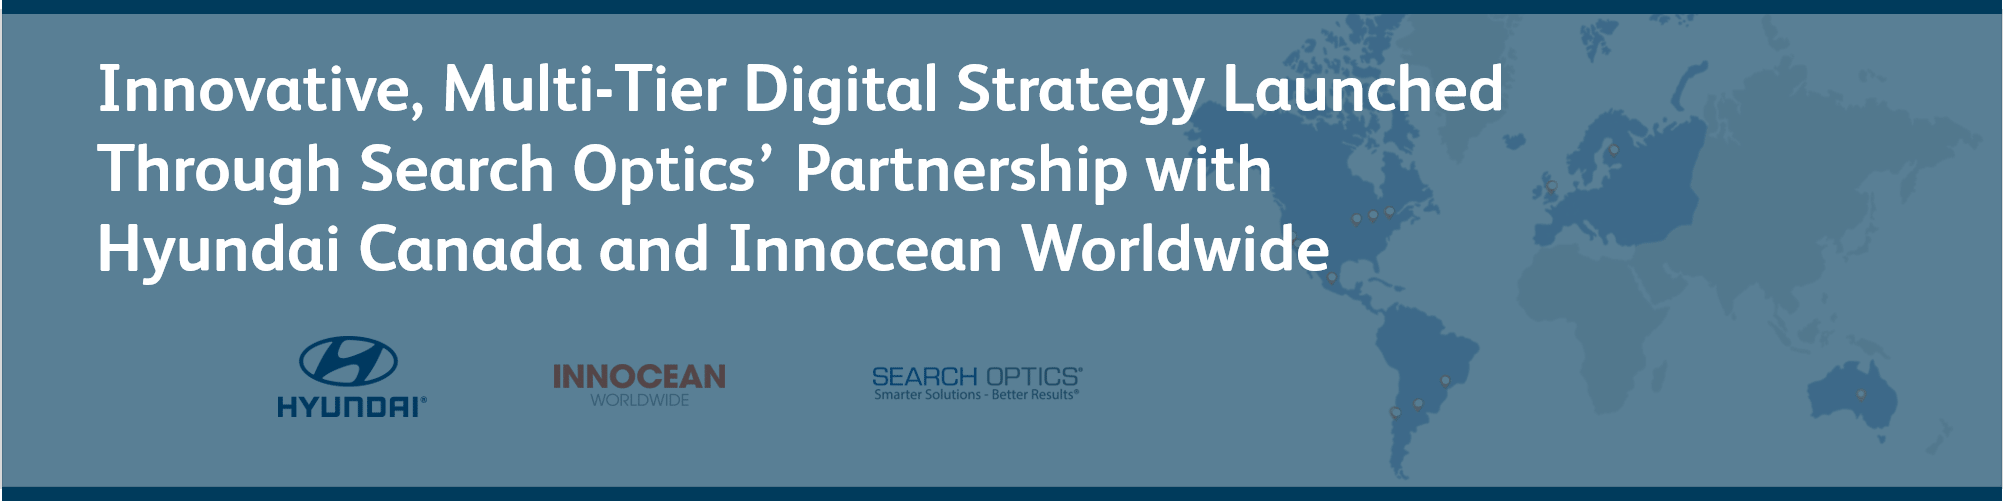 Innovative, Multi-Tier Digital Strategy Launched Through Search Optics’ Partnership with Hyundai Canada and Innocean Worldwide